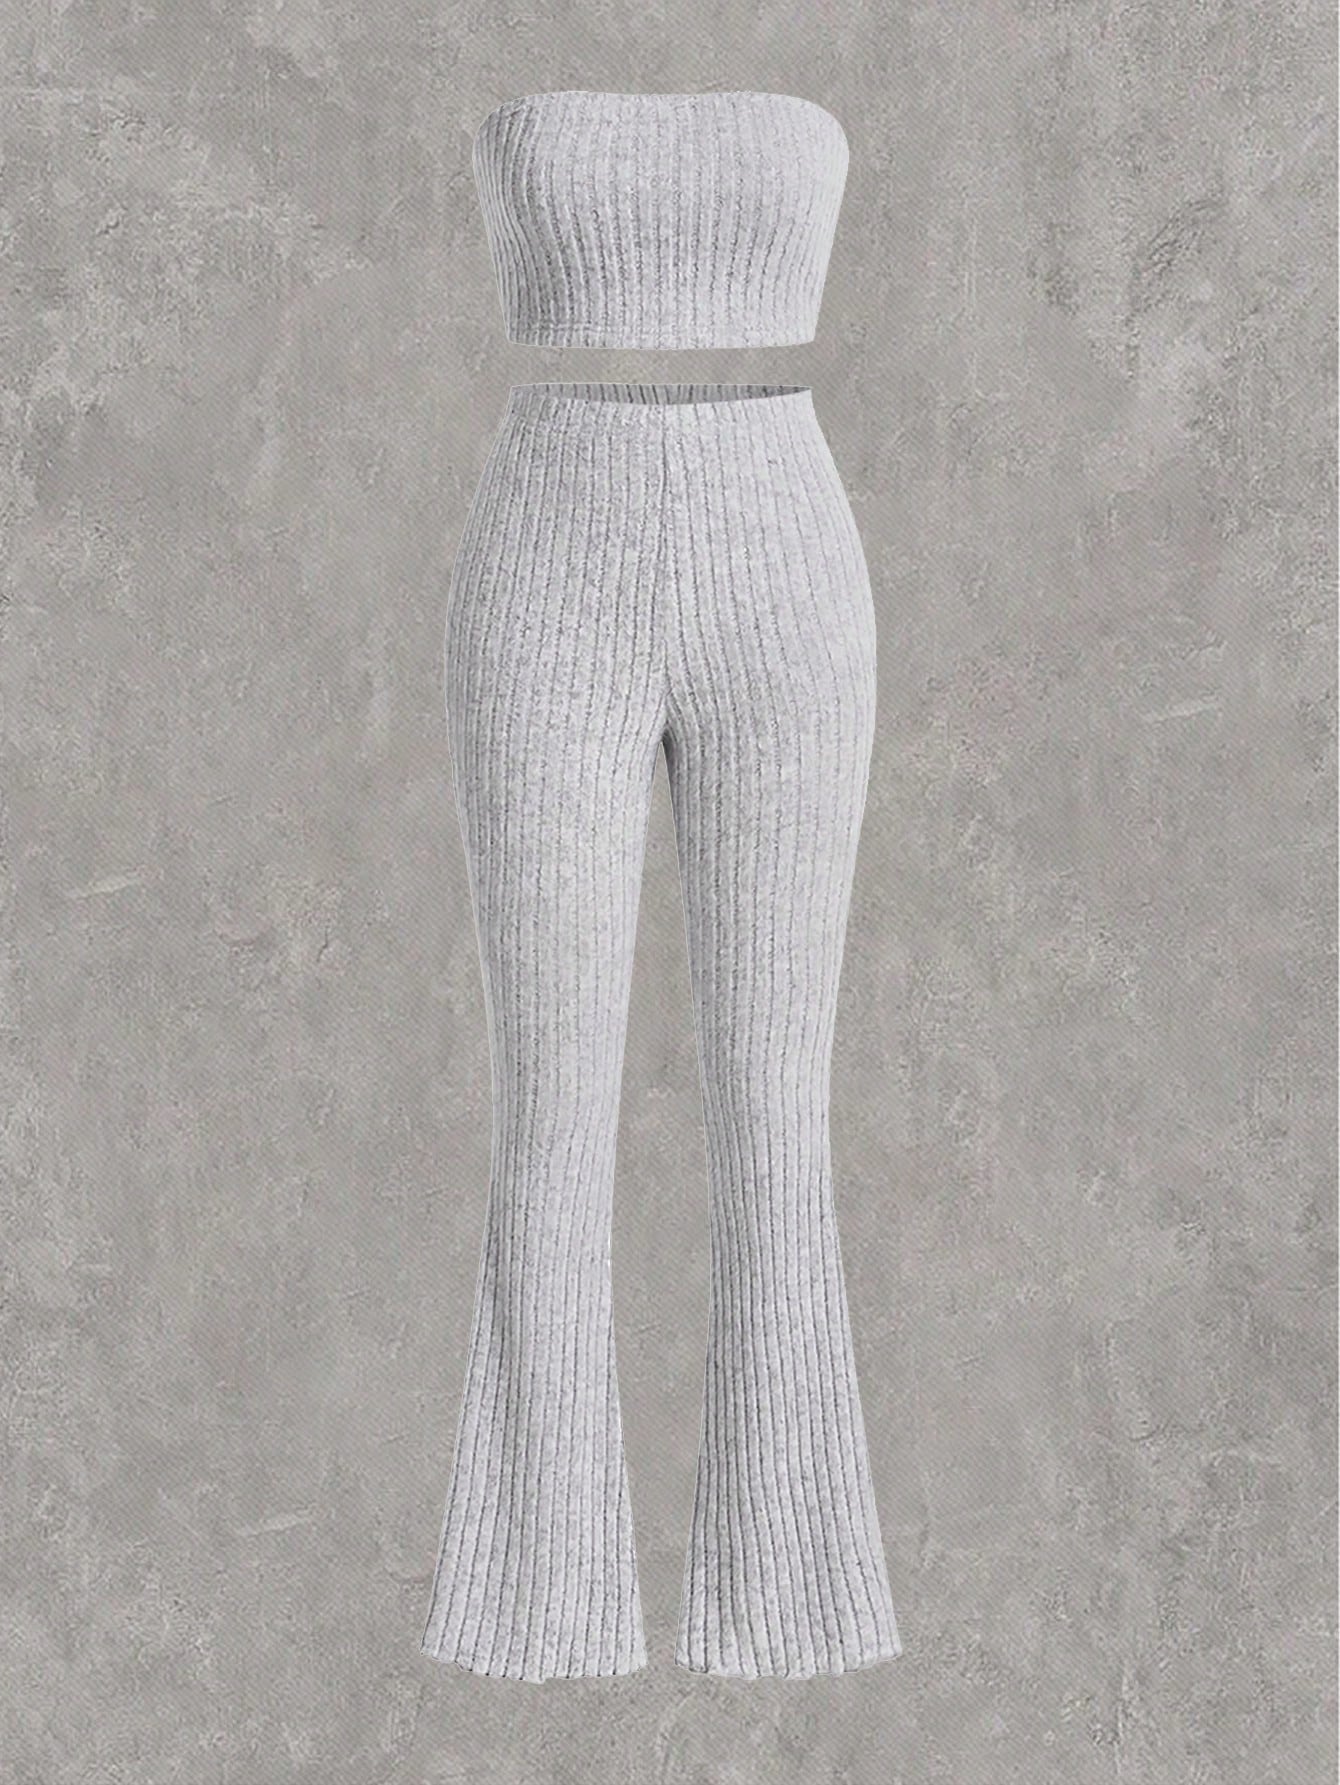 Plus Size Solid Ribbed Knit Tube & Boot Cut Pants Casual Two Piece Set